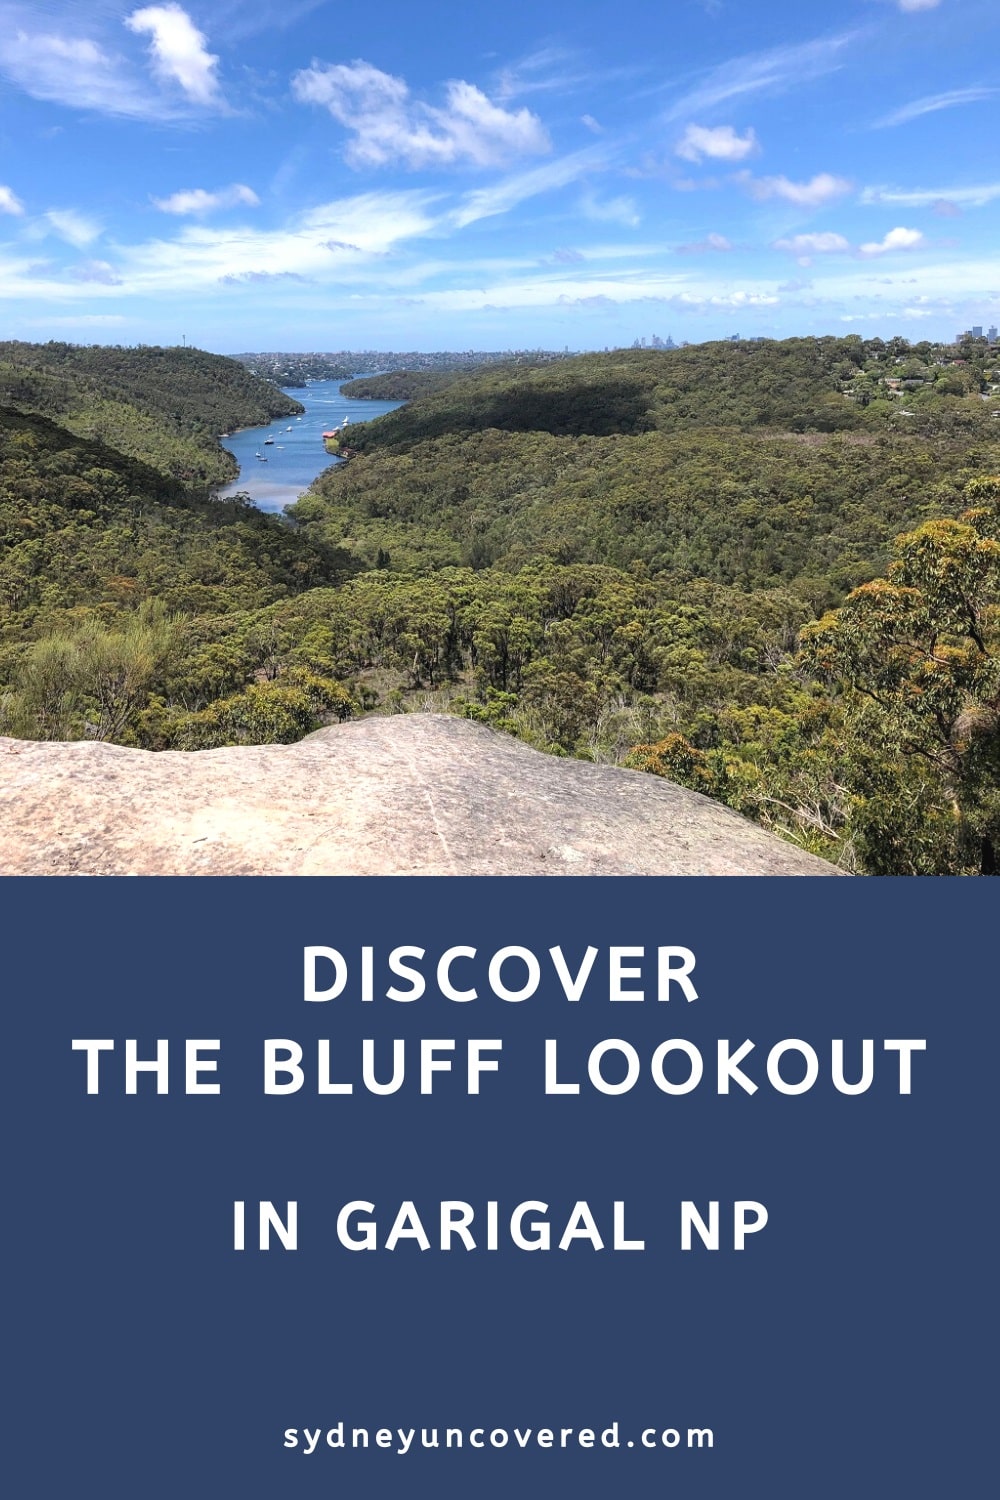 The Bluff Lookout in Garigal National Park